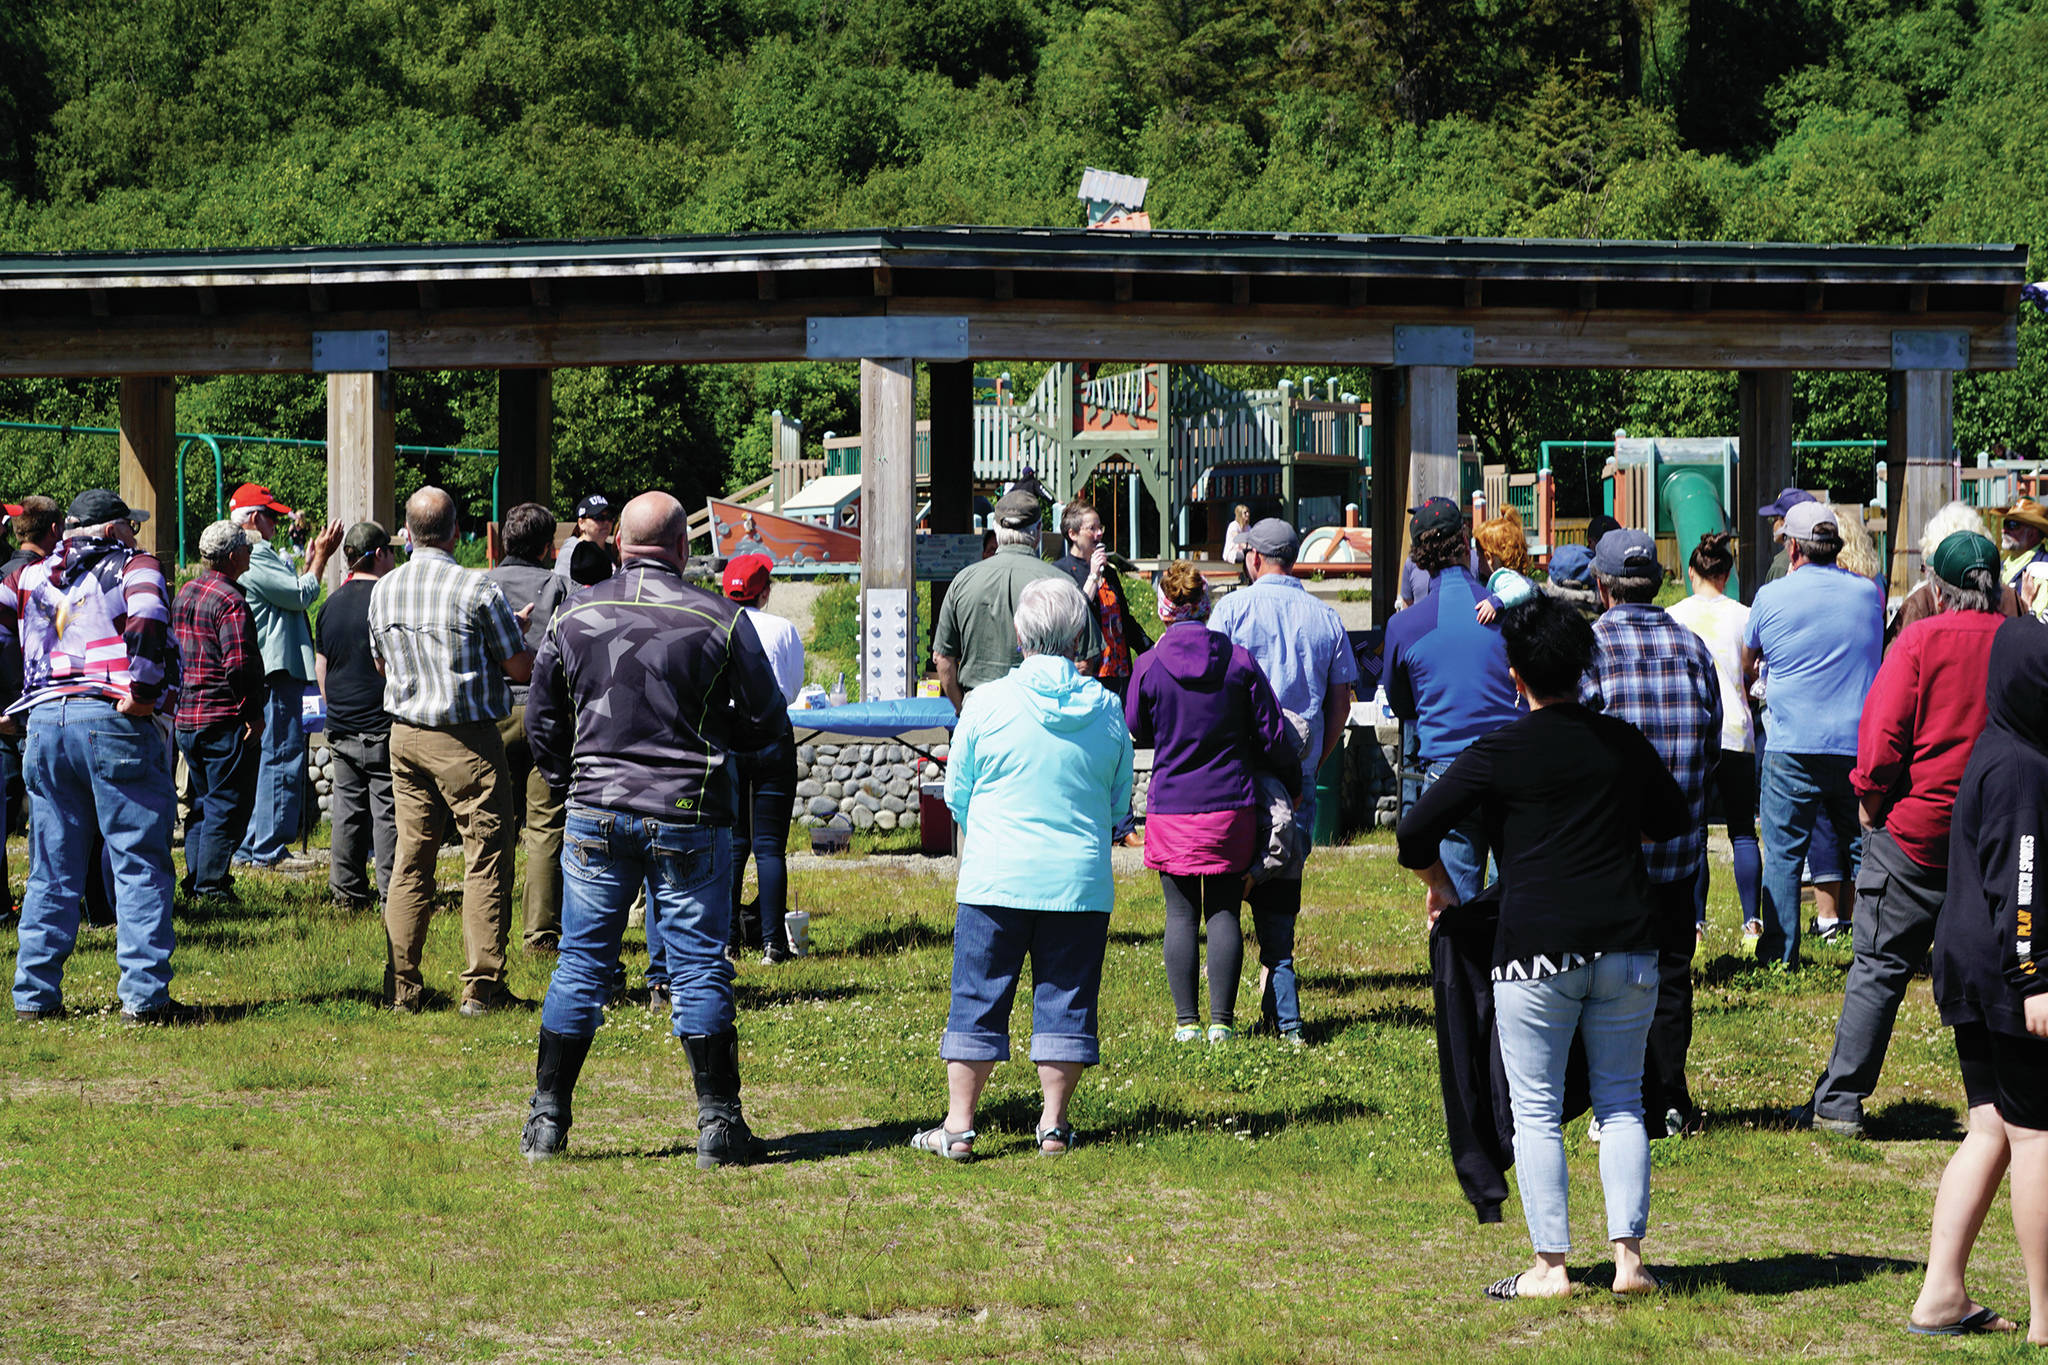 A group of about 125 people listen to Rep. Sarah Vance, R-Alaska, at a kickoff for her re-election campaign on Sunday, June 14, 2020, at Karen Hornaday Park in Homer, Alaska. (Photo by Michael Armstrong/Homer News)